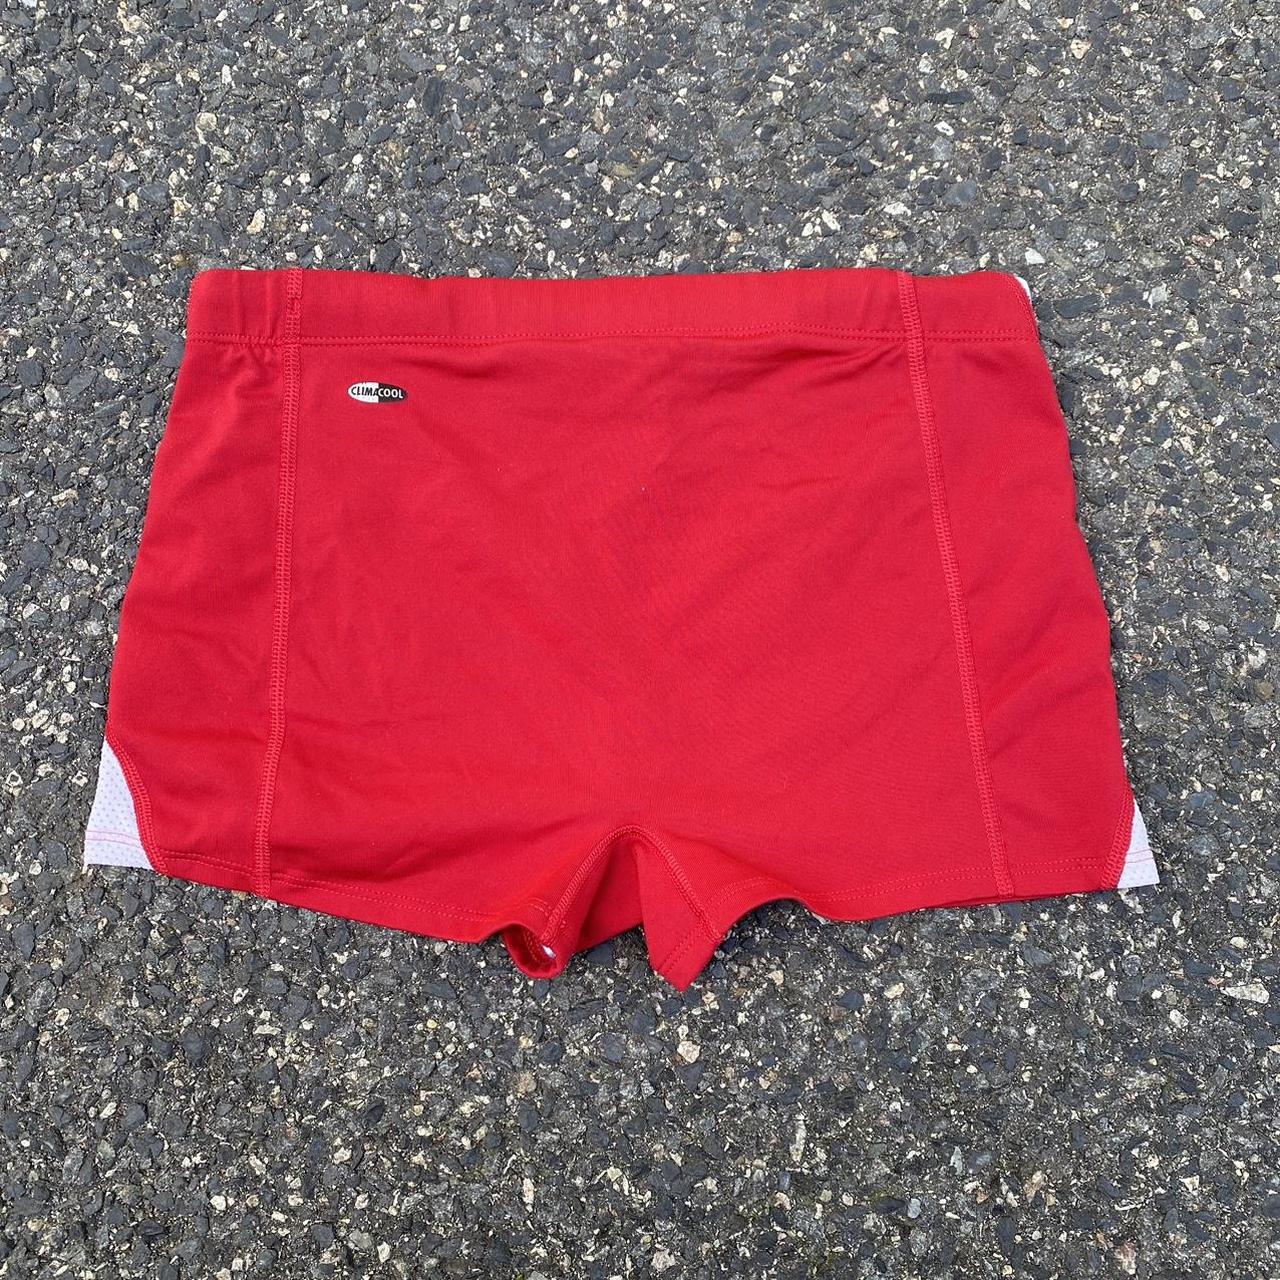 Adidas Women's Red and White Shorts (2)